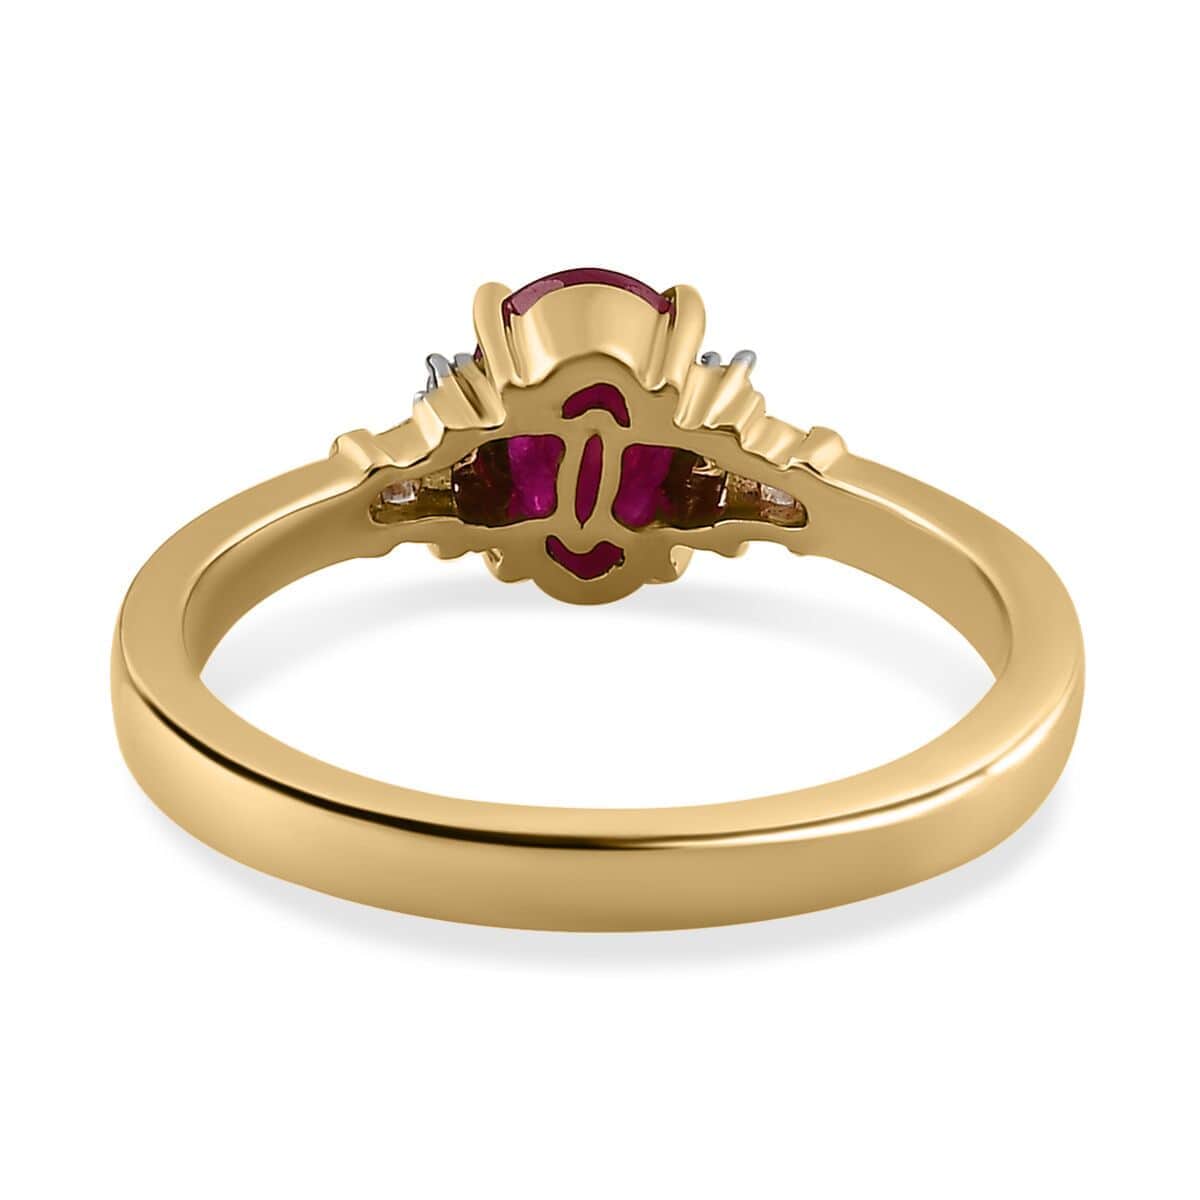 Luxoro 10K Yellow Gold Premium Mozambique Ruby and G-H I3 Diamond Ring 4.25 Grams 1.60 ctw (Del. in 7-10 Days) image number 4